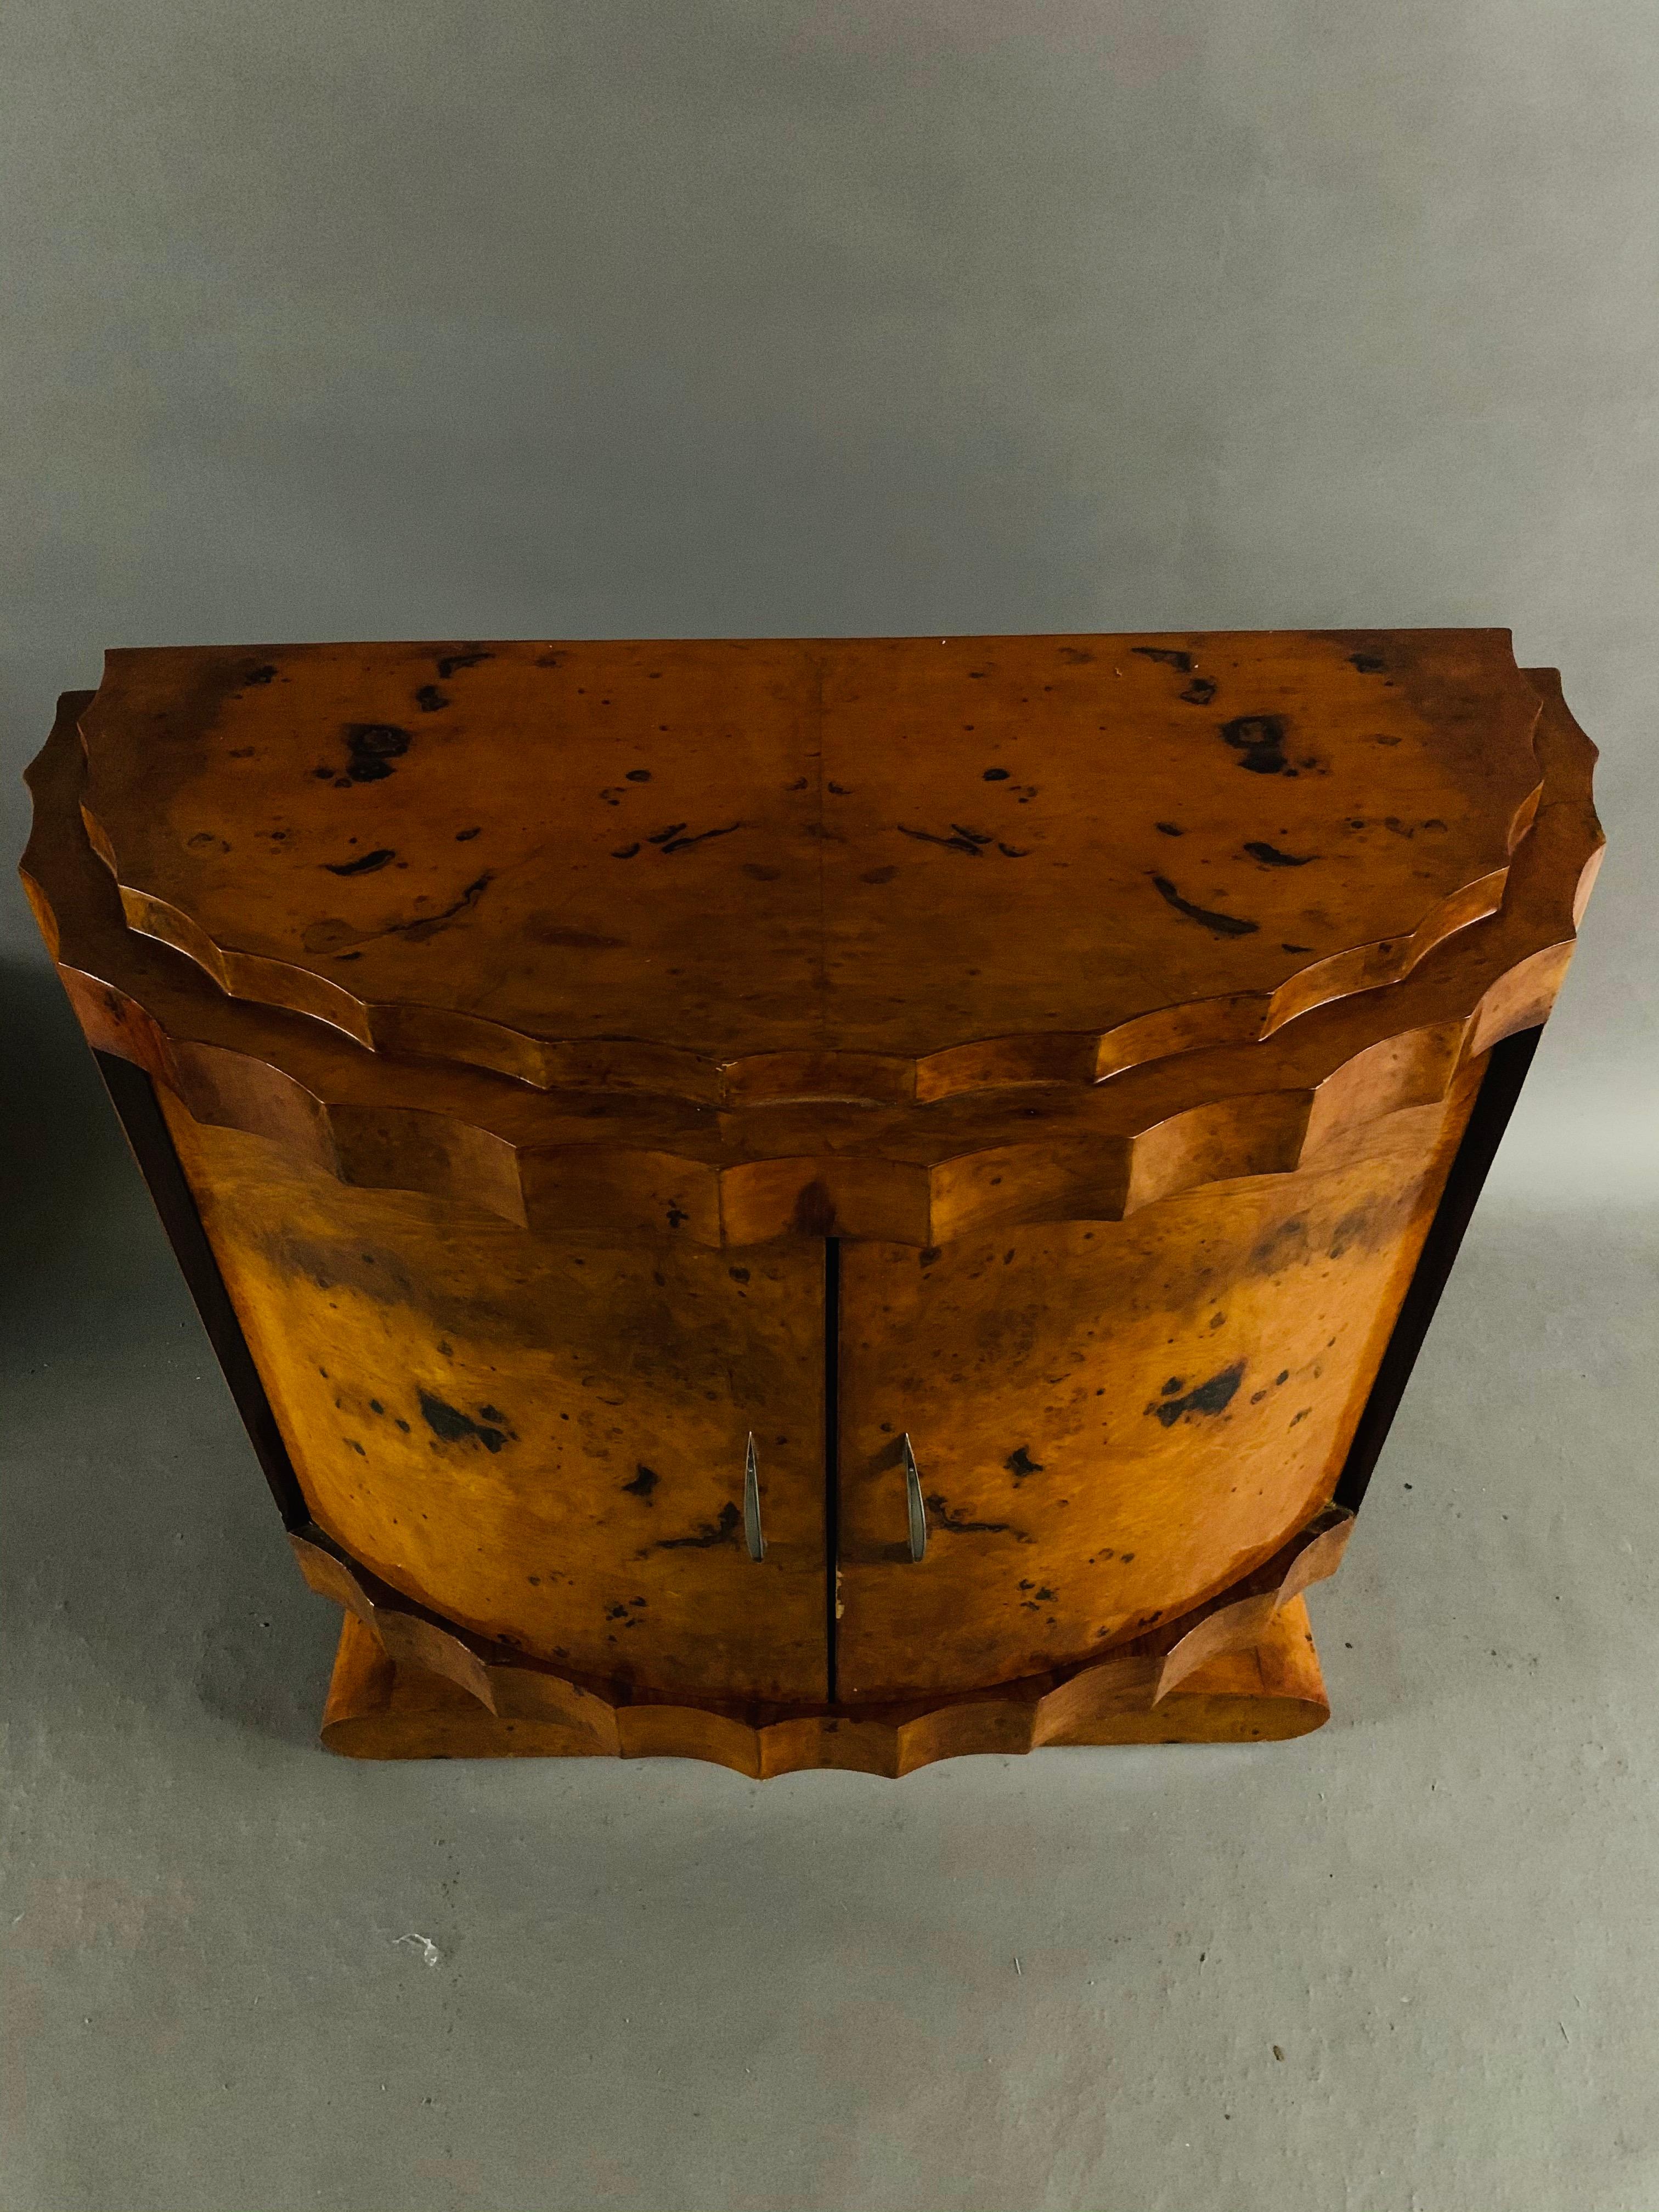 Exotic maple root veneer on solid softwood. Cambered and corrugated body with two double doors on a rectangular base plate. Slightly recessed cover plate. Inside a shelf. Nice patina, hand polish with shellac.